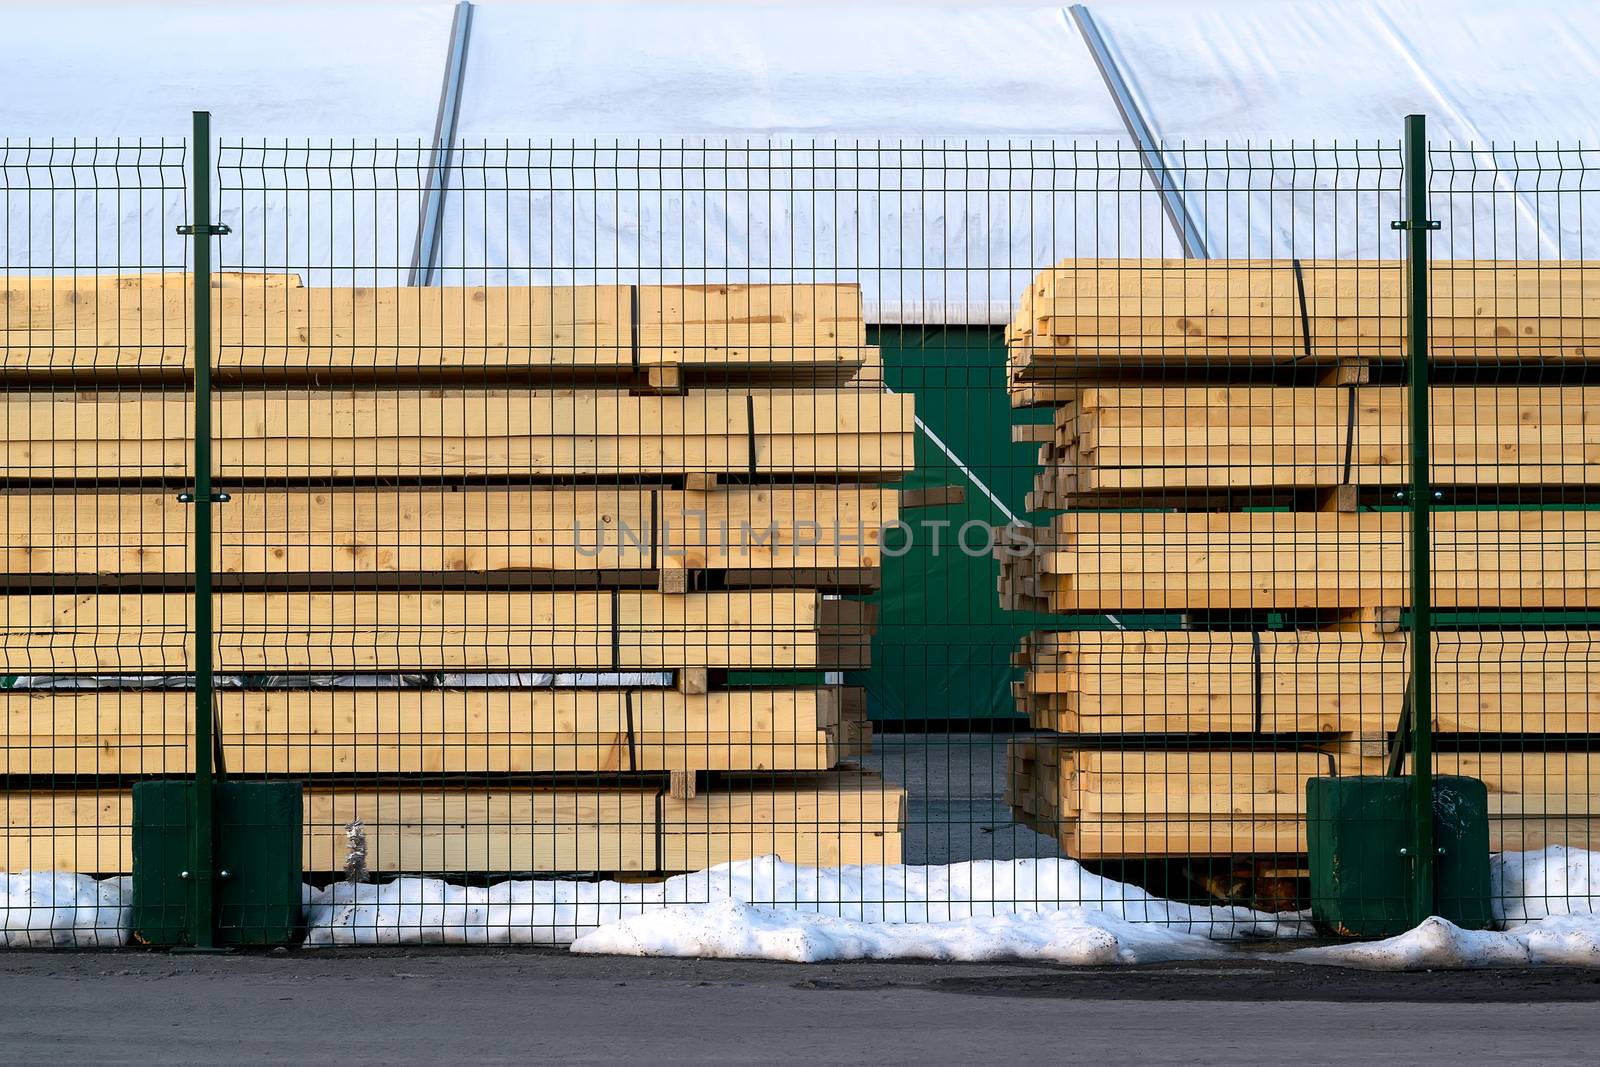 hewn, carved square logs. Lumber neatly stacked behind the fence by jk3030